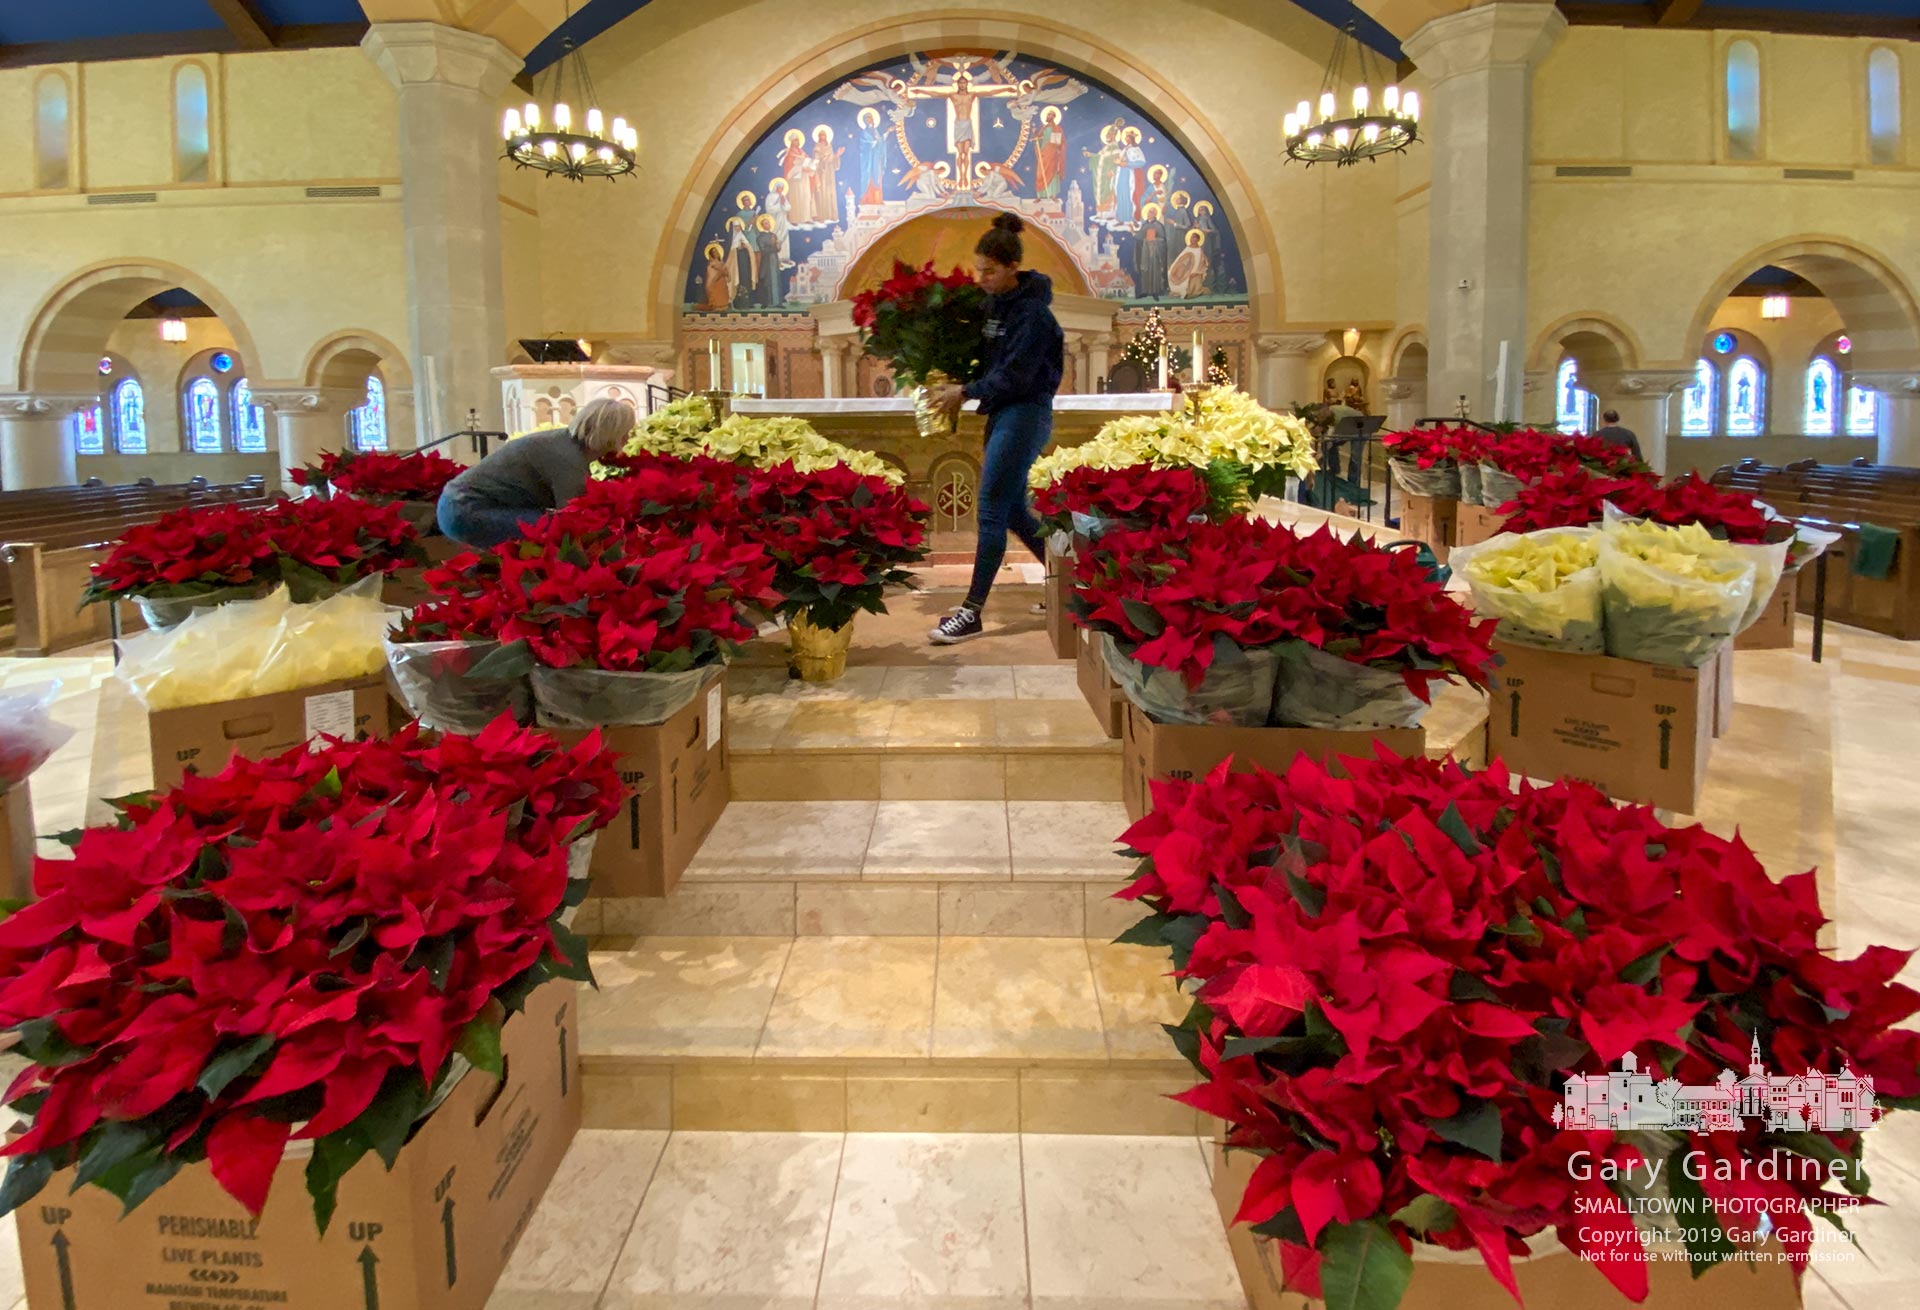 Parishioners unbox, sort, and place red and yellow poinsettias around the altar as St. Paul the Apostle Catholic Church prepares for its Christmas Masses. My Final Photo for Dec. 23, 2019.